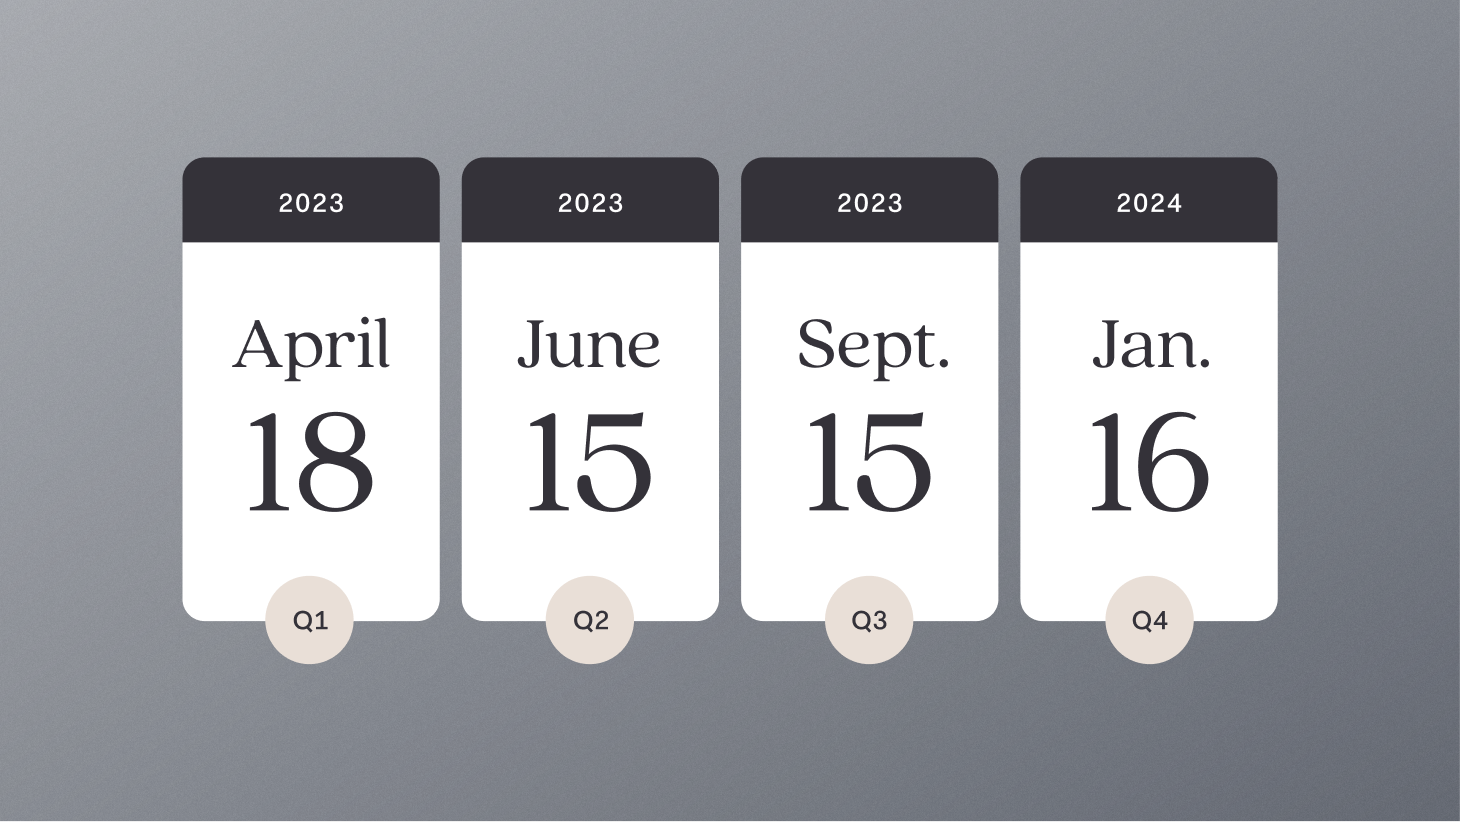 2023 Tax Deadlines SelfEmployed Individuals Should Know